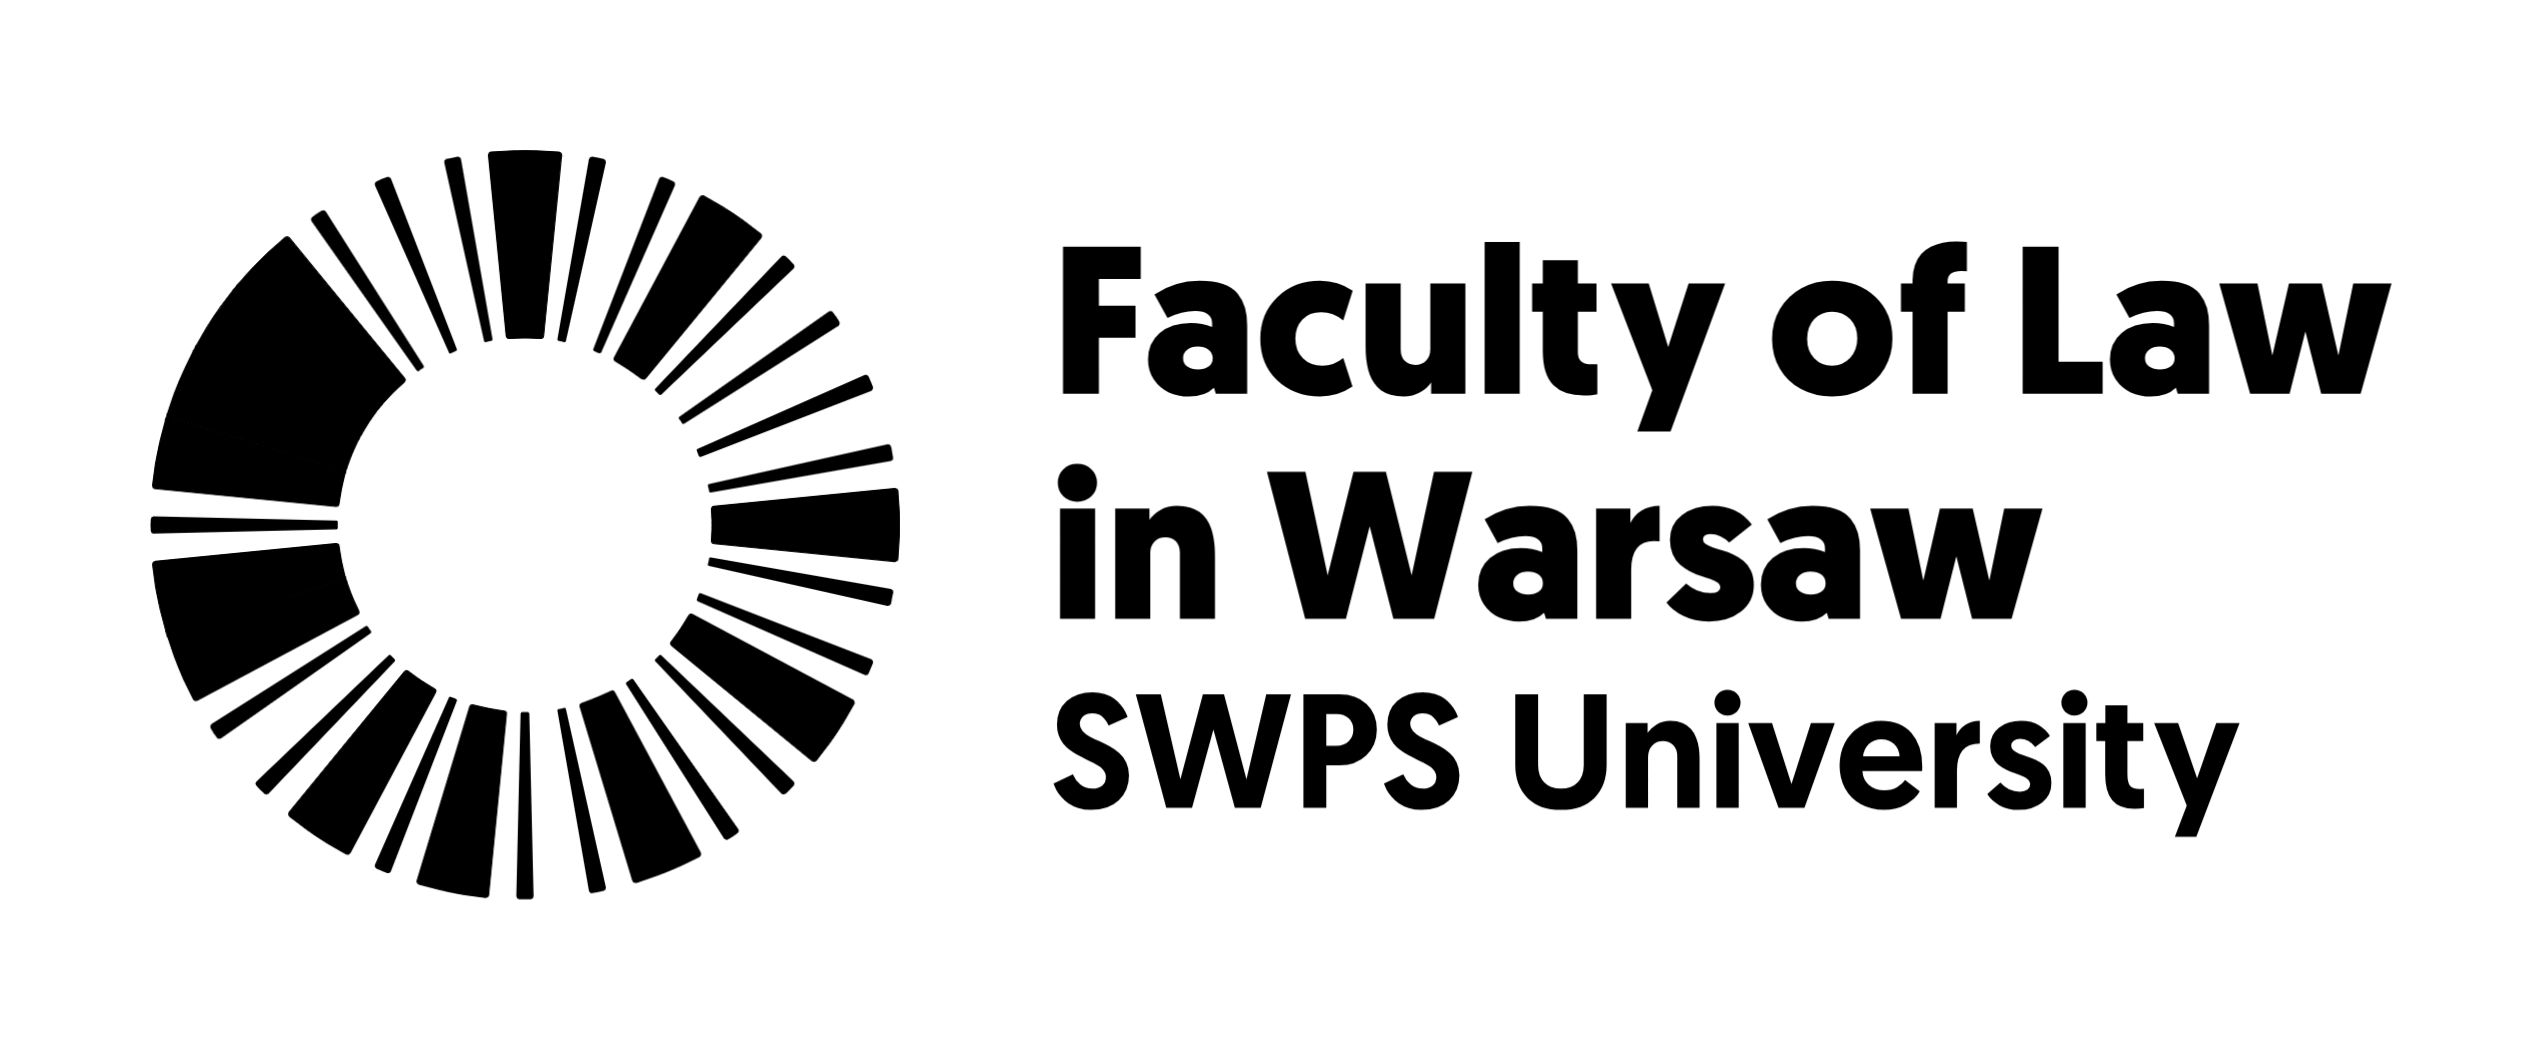 Faculty of Law in Warsaw